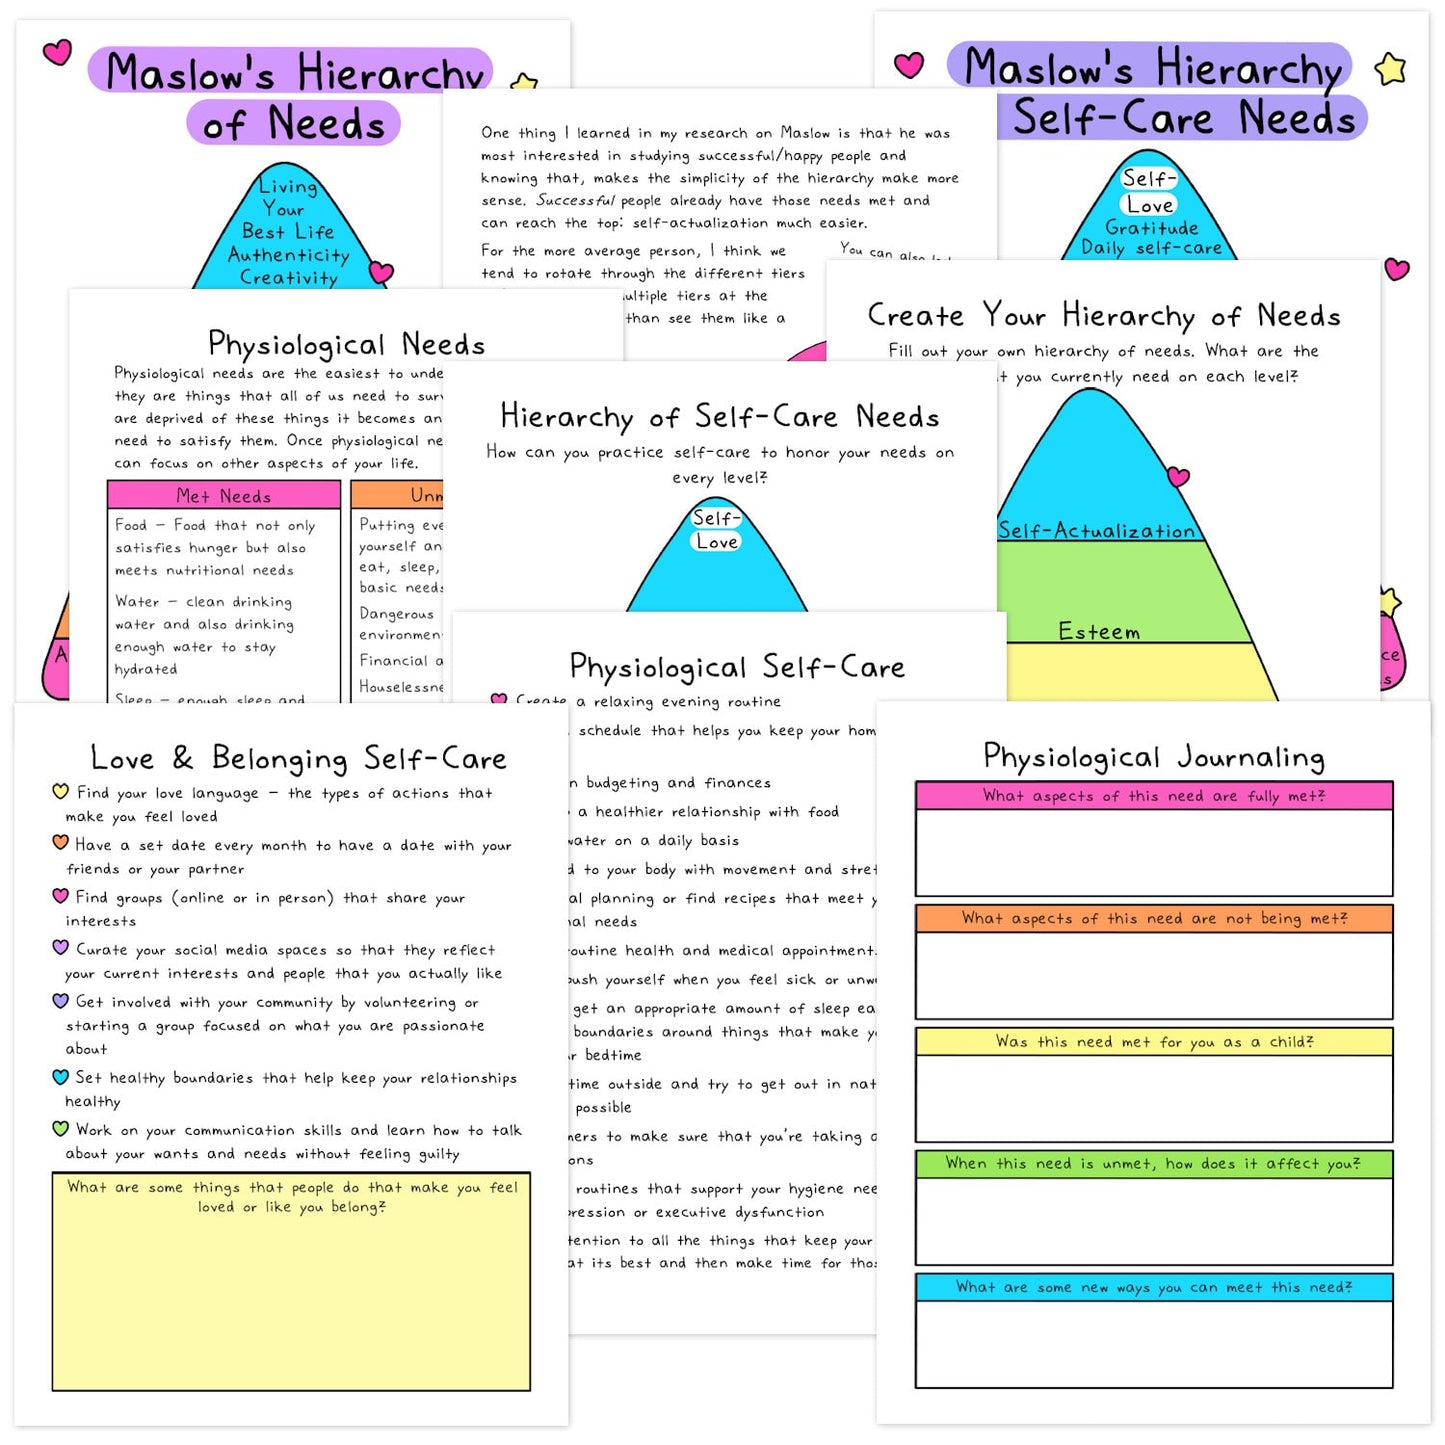 Maslow's Hierarchy of Needs Workbook